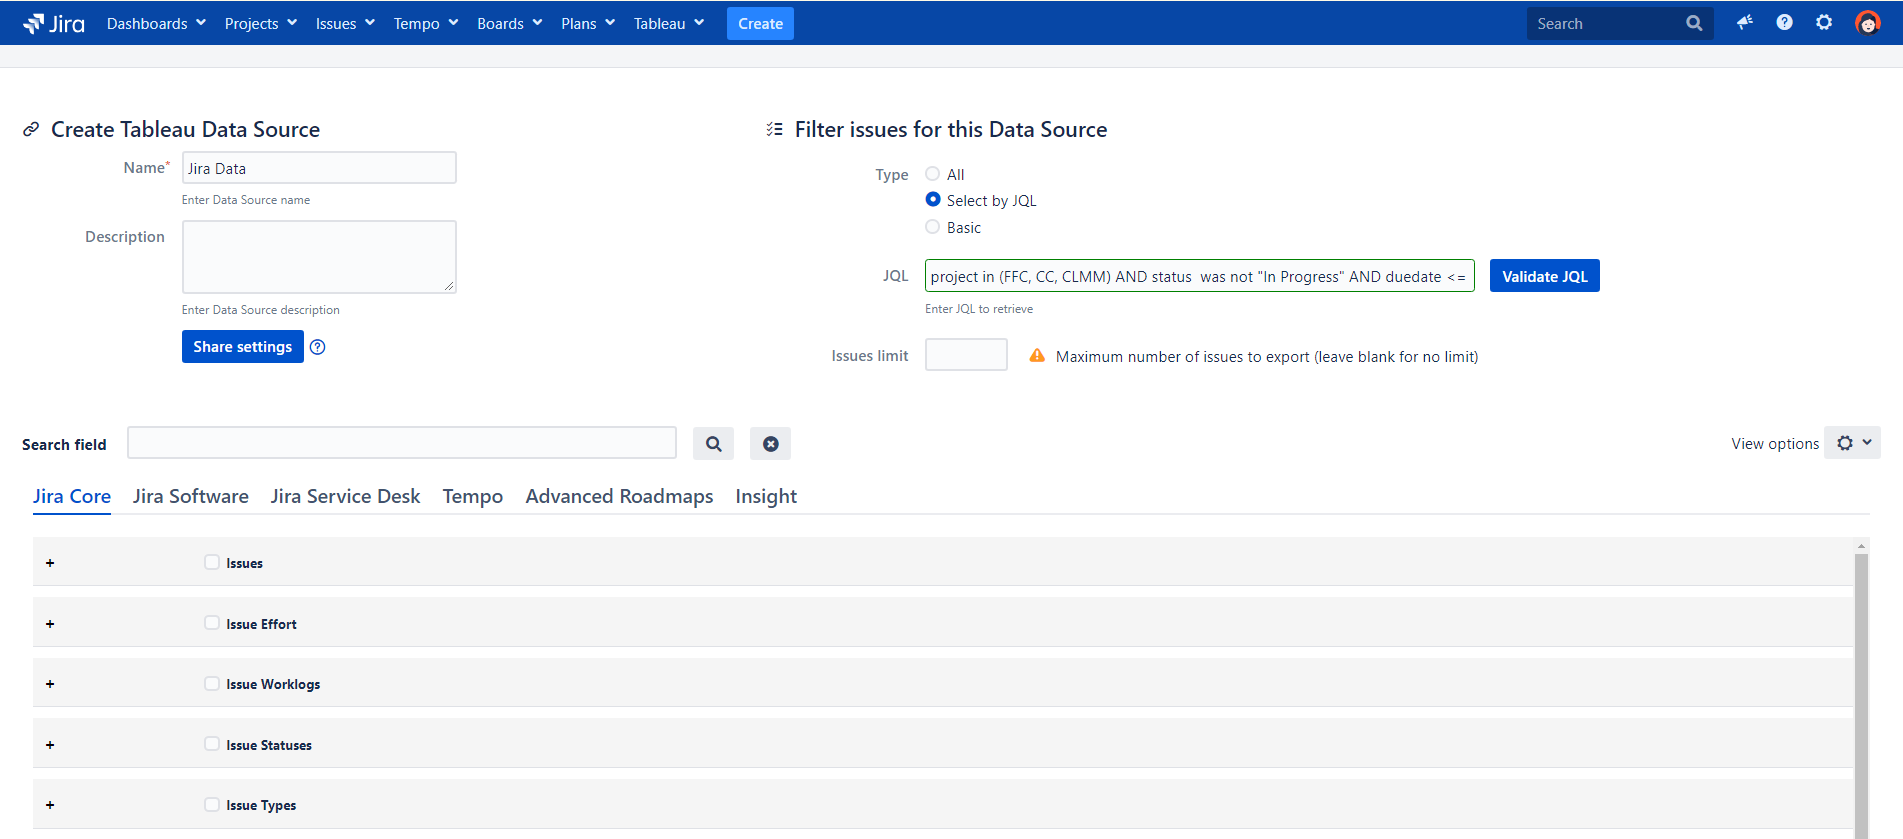 Tableau Connector for Jira Software - Create a Tableau Data Source, use various filtering options, including basic filters or JQL